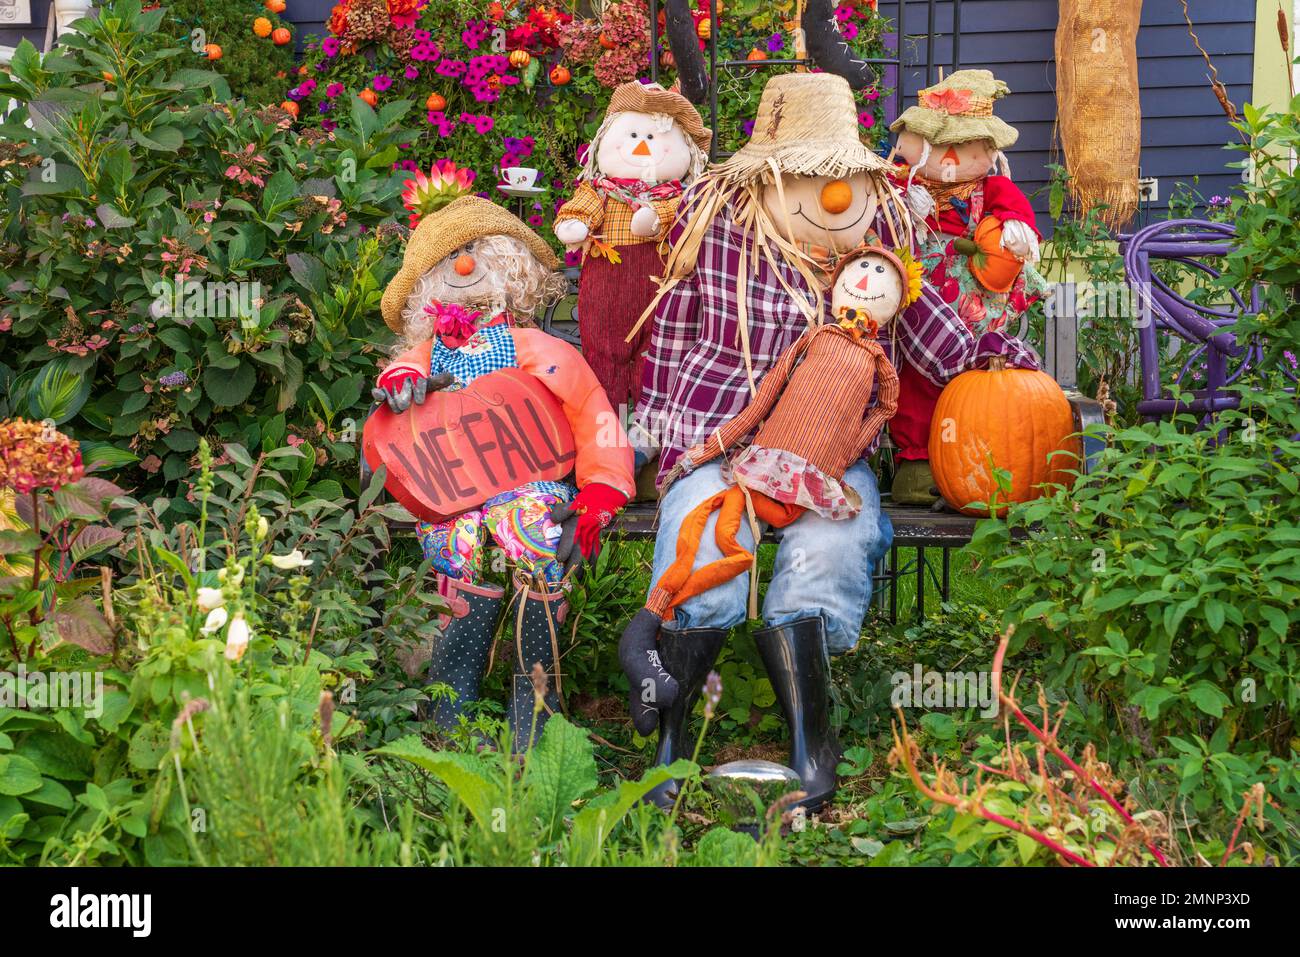 A pumpkin and scarecrow display in the front yard of a home in Truro, Nova Scotia, Canada. Stock Photo